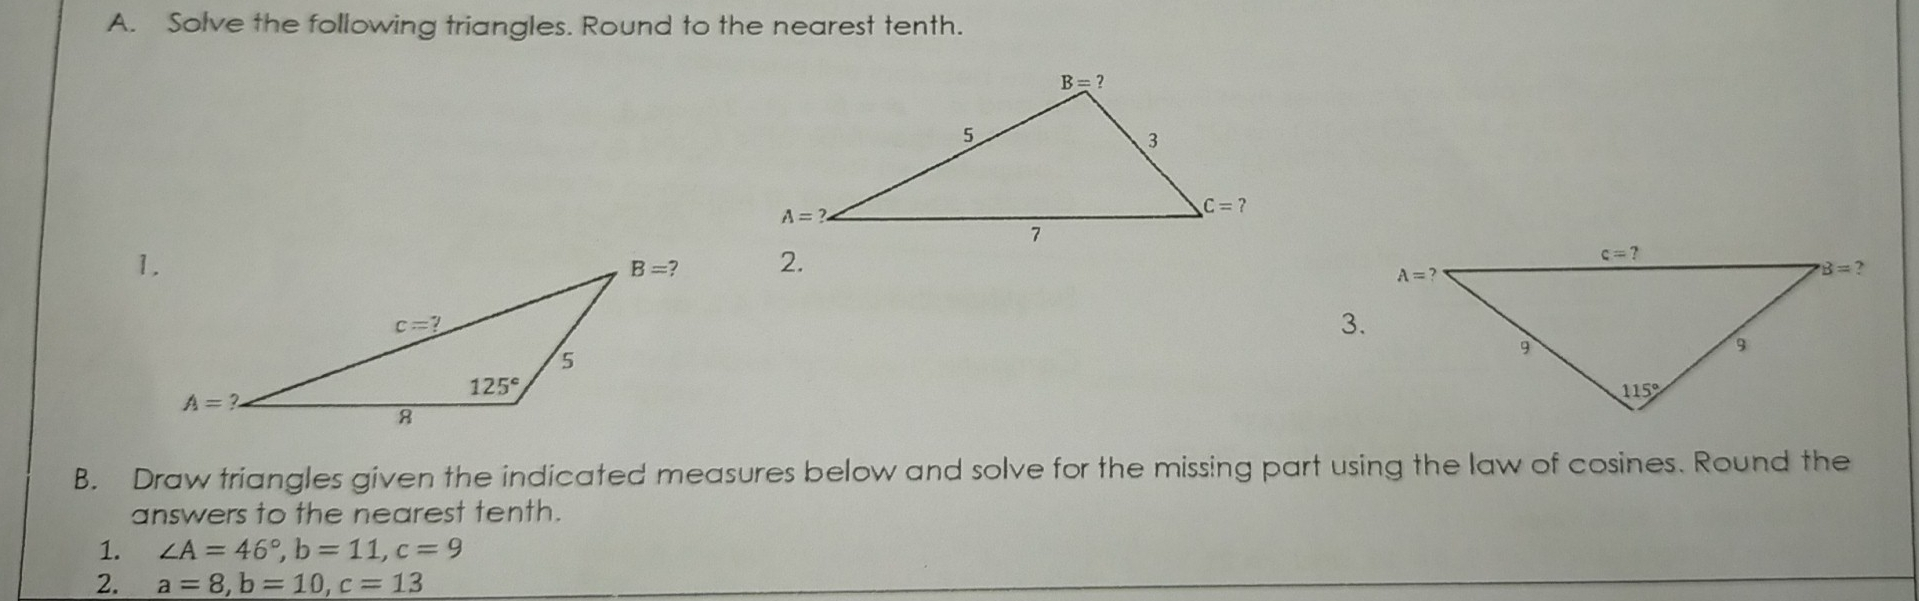 A. Solve the following triangles. Round to the nearest tenth. 1 c=? A=? B=? 3. g 115 ° B. Draw triangles given the indicated measures below and solve for the missing part using the law of cosines. Round the answers to the nearest tenth. 1. angle A=46 ° ,b=11,c=9 2. a=8,b=10,c=13